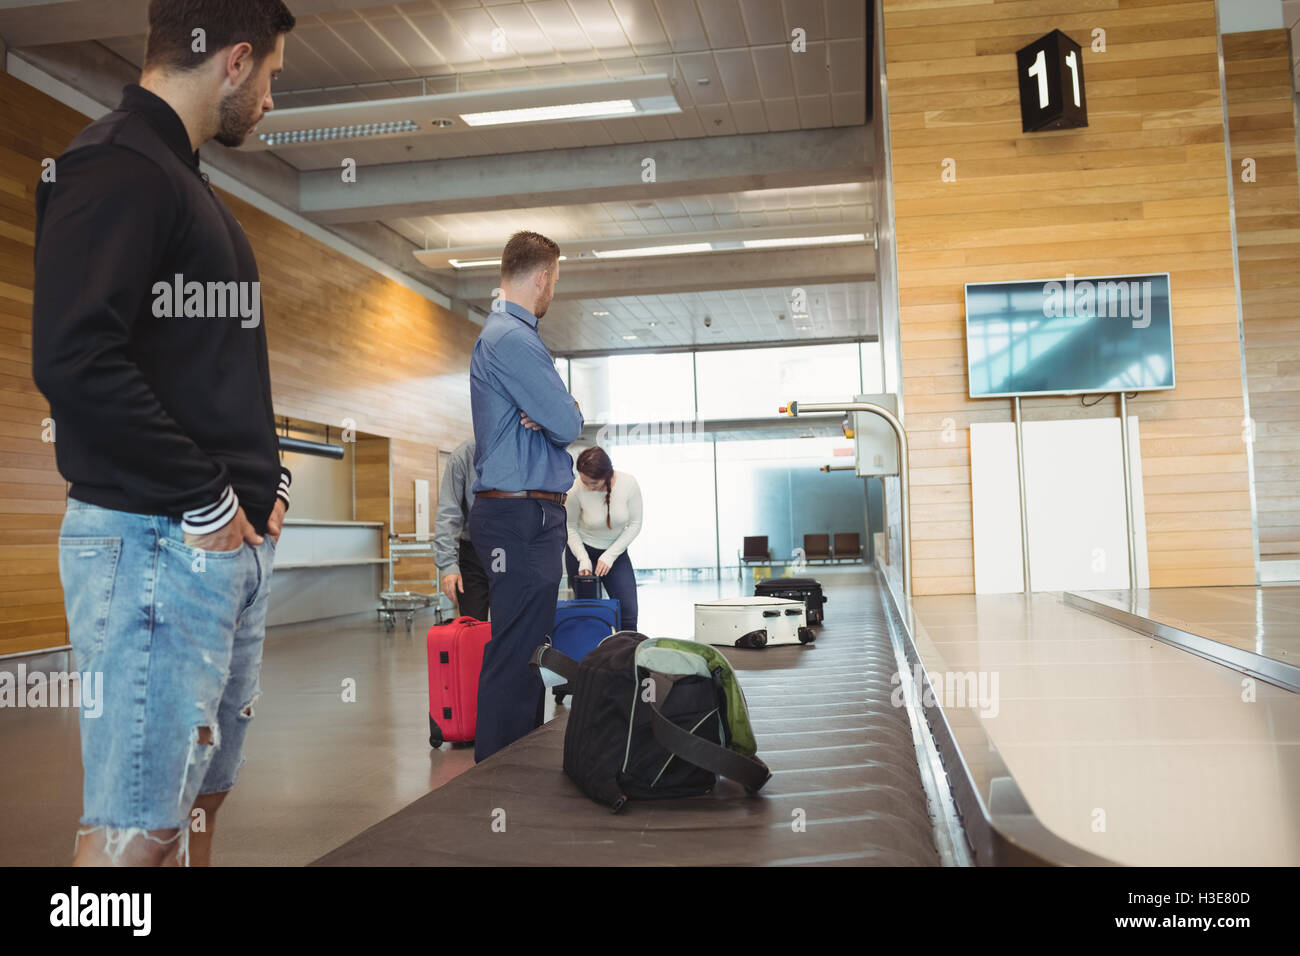 People waiting for luggage in baggage claim area Stock Photo